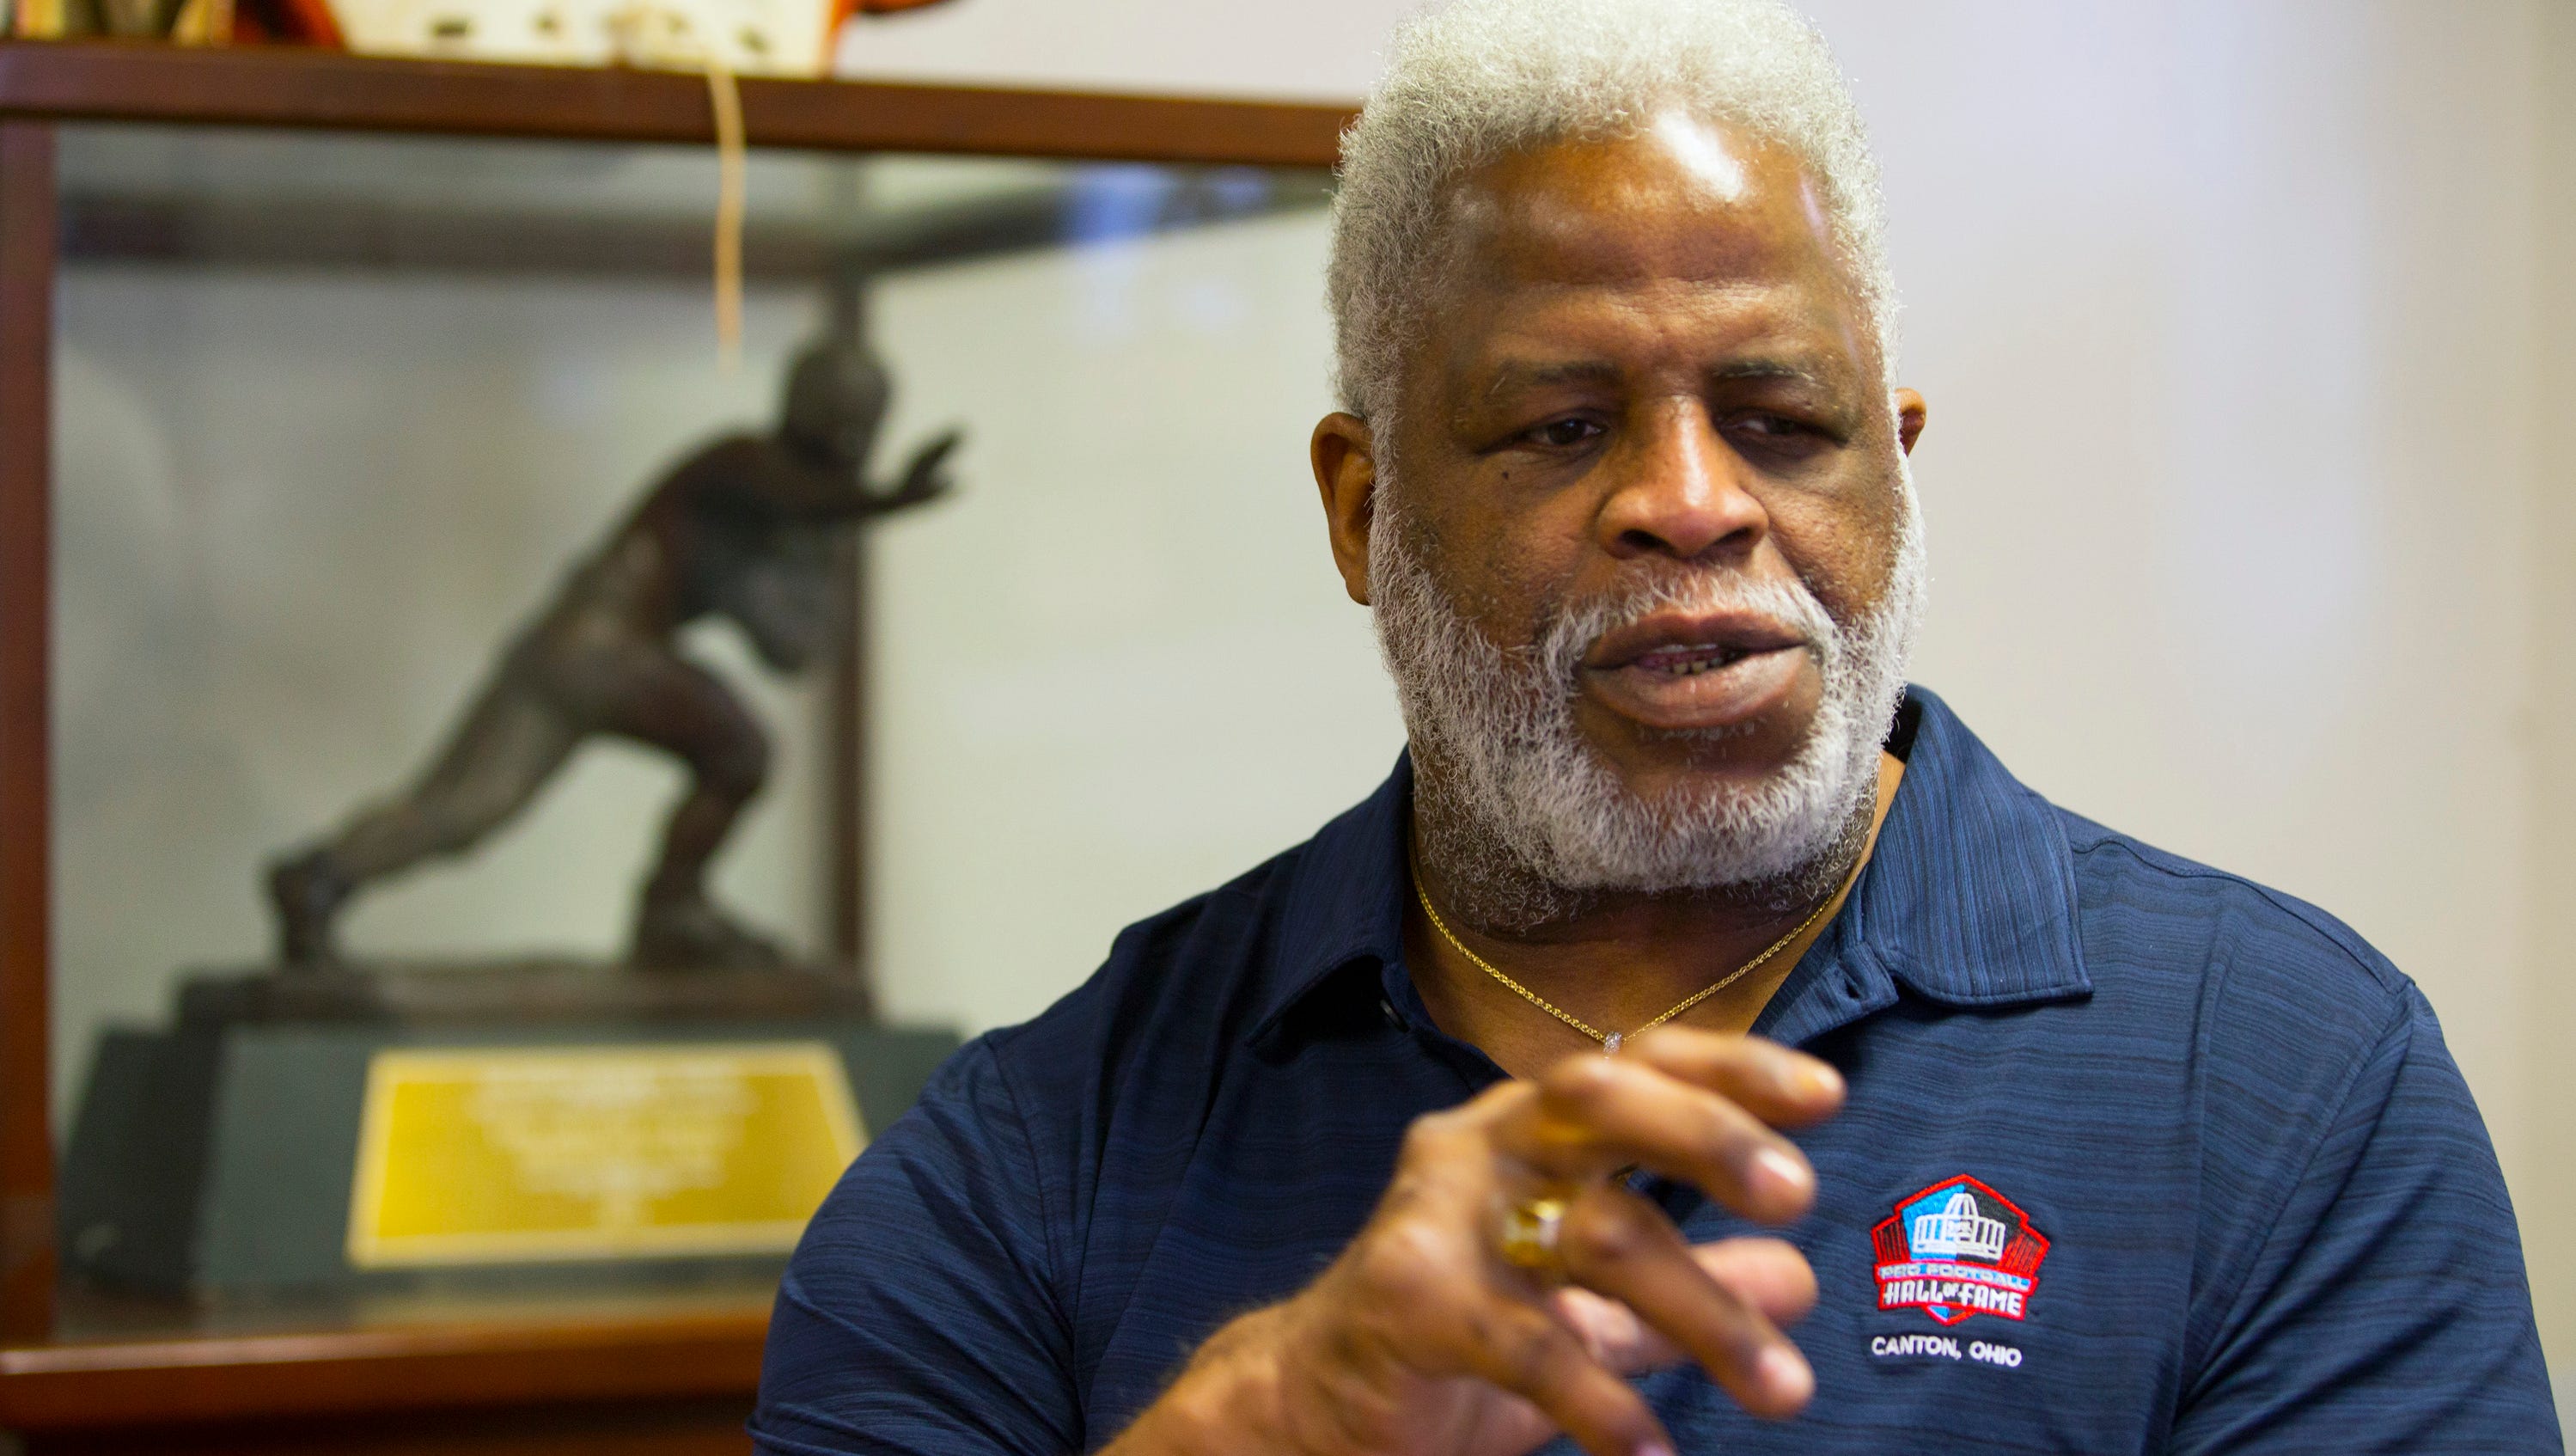 Earl Campbell wearing blue polo shirt